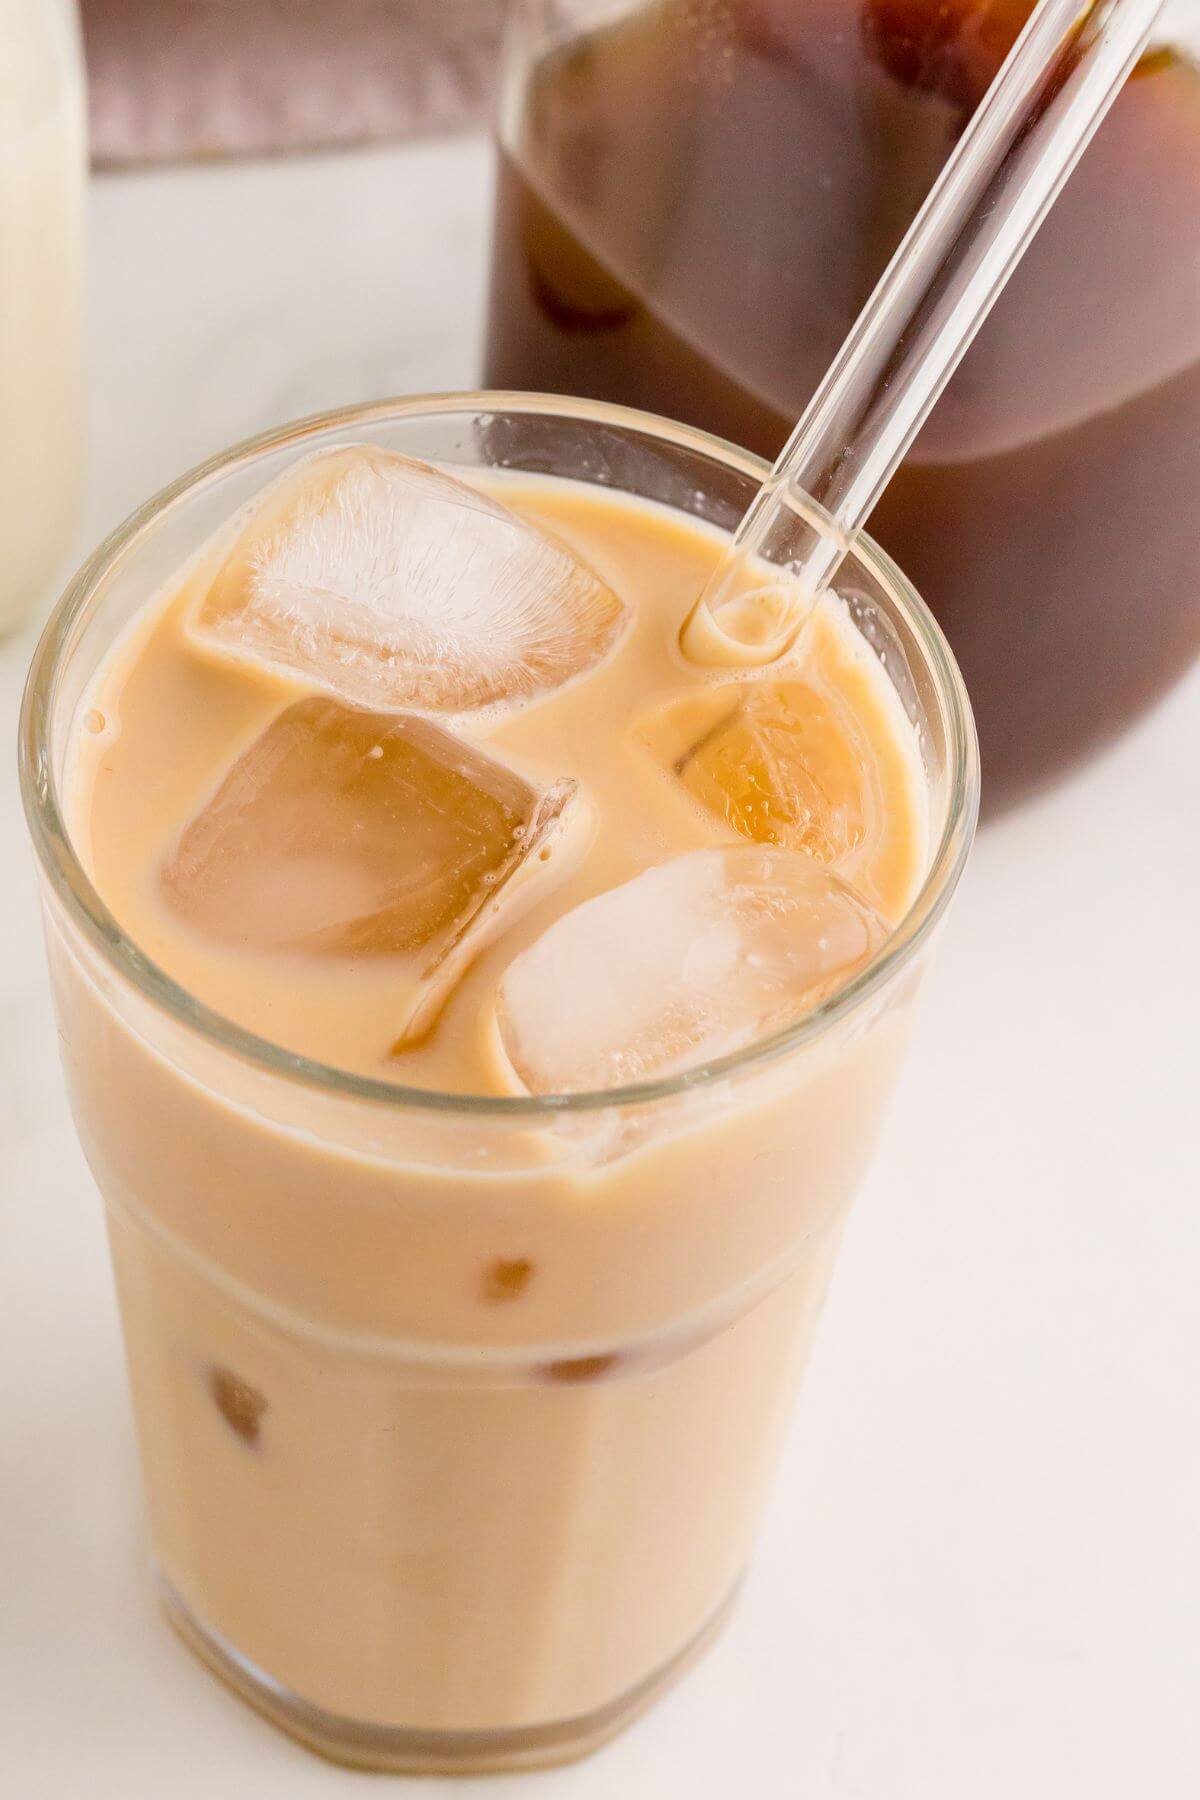 Light brown chai and milk is blended together for a smooth drink in a glass with straw.